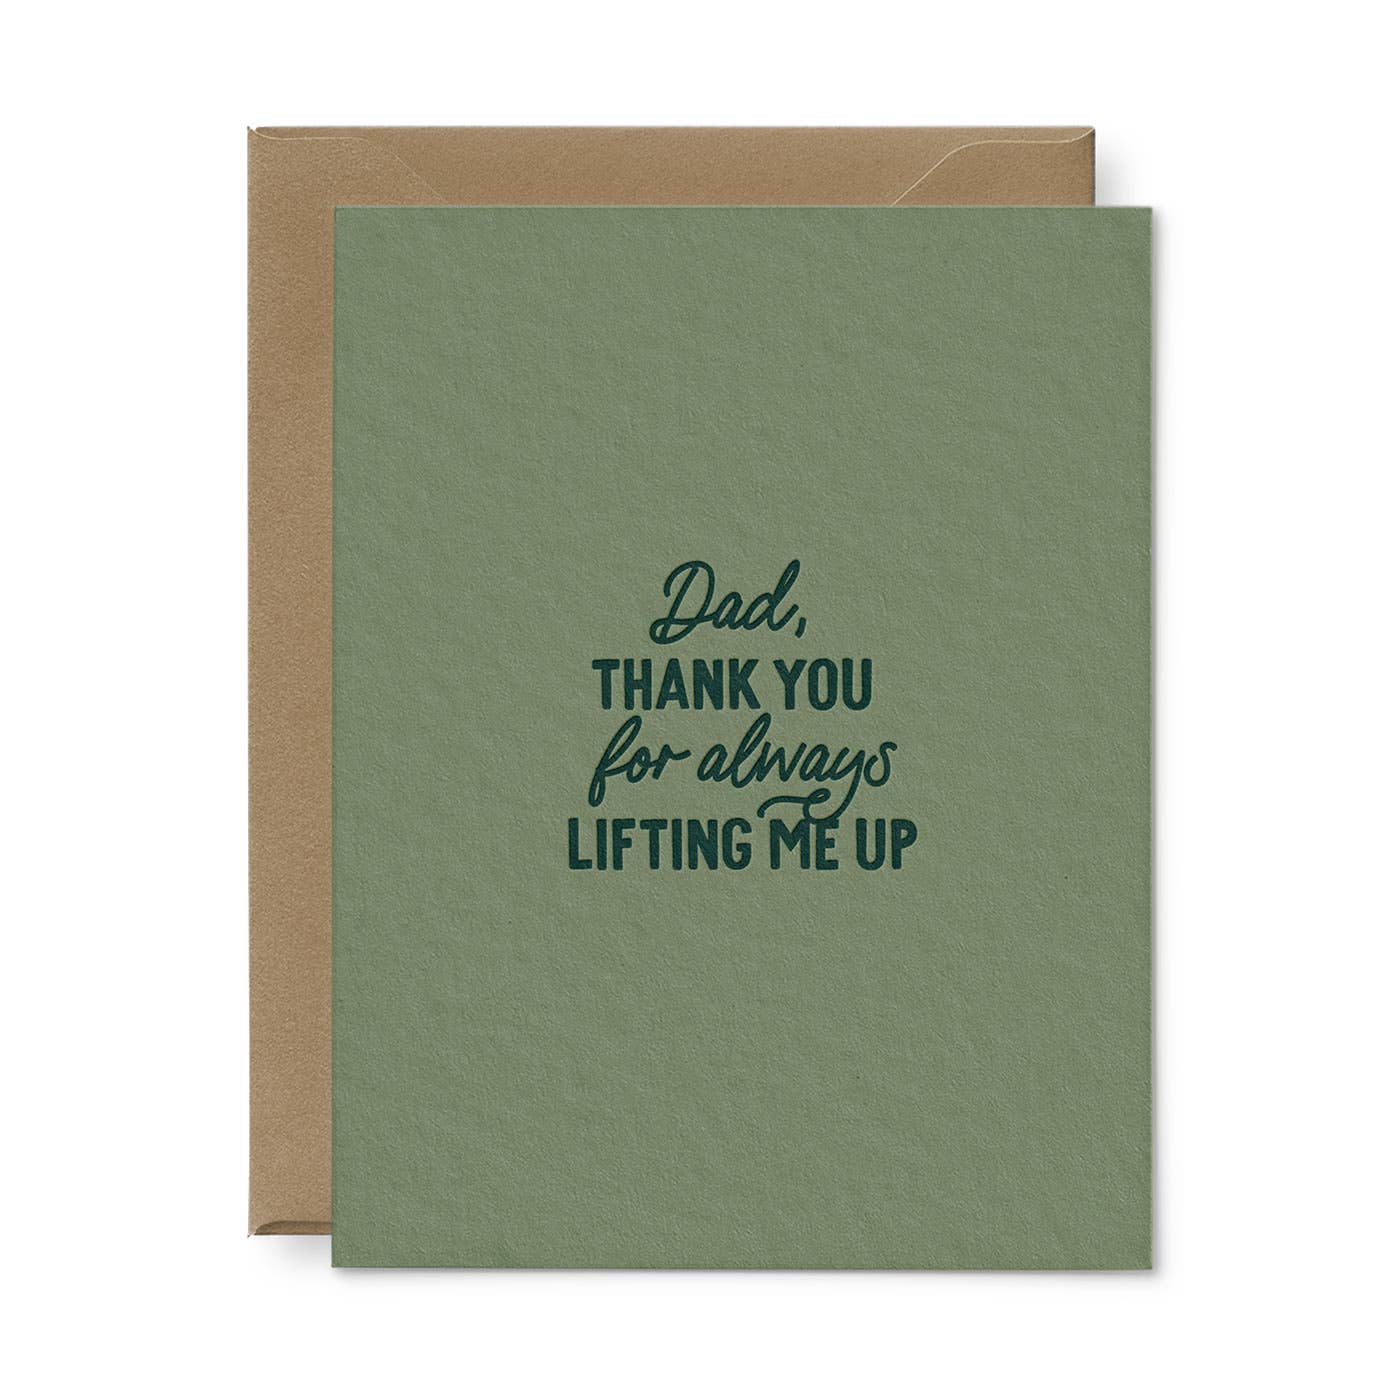 Ruff House Print Shop - Lifting Me Up Father's Day Greeting Card